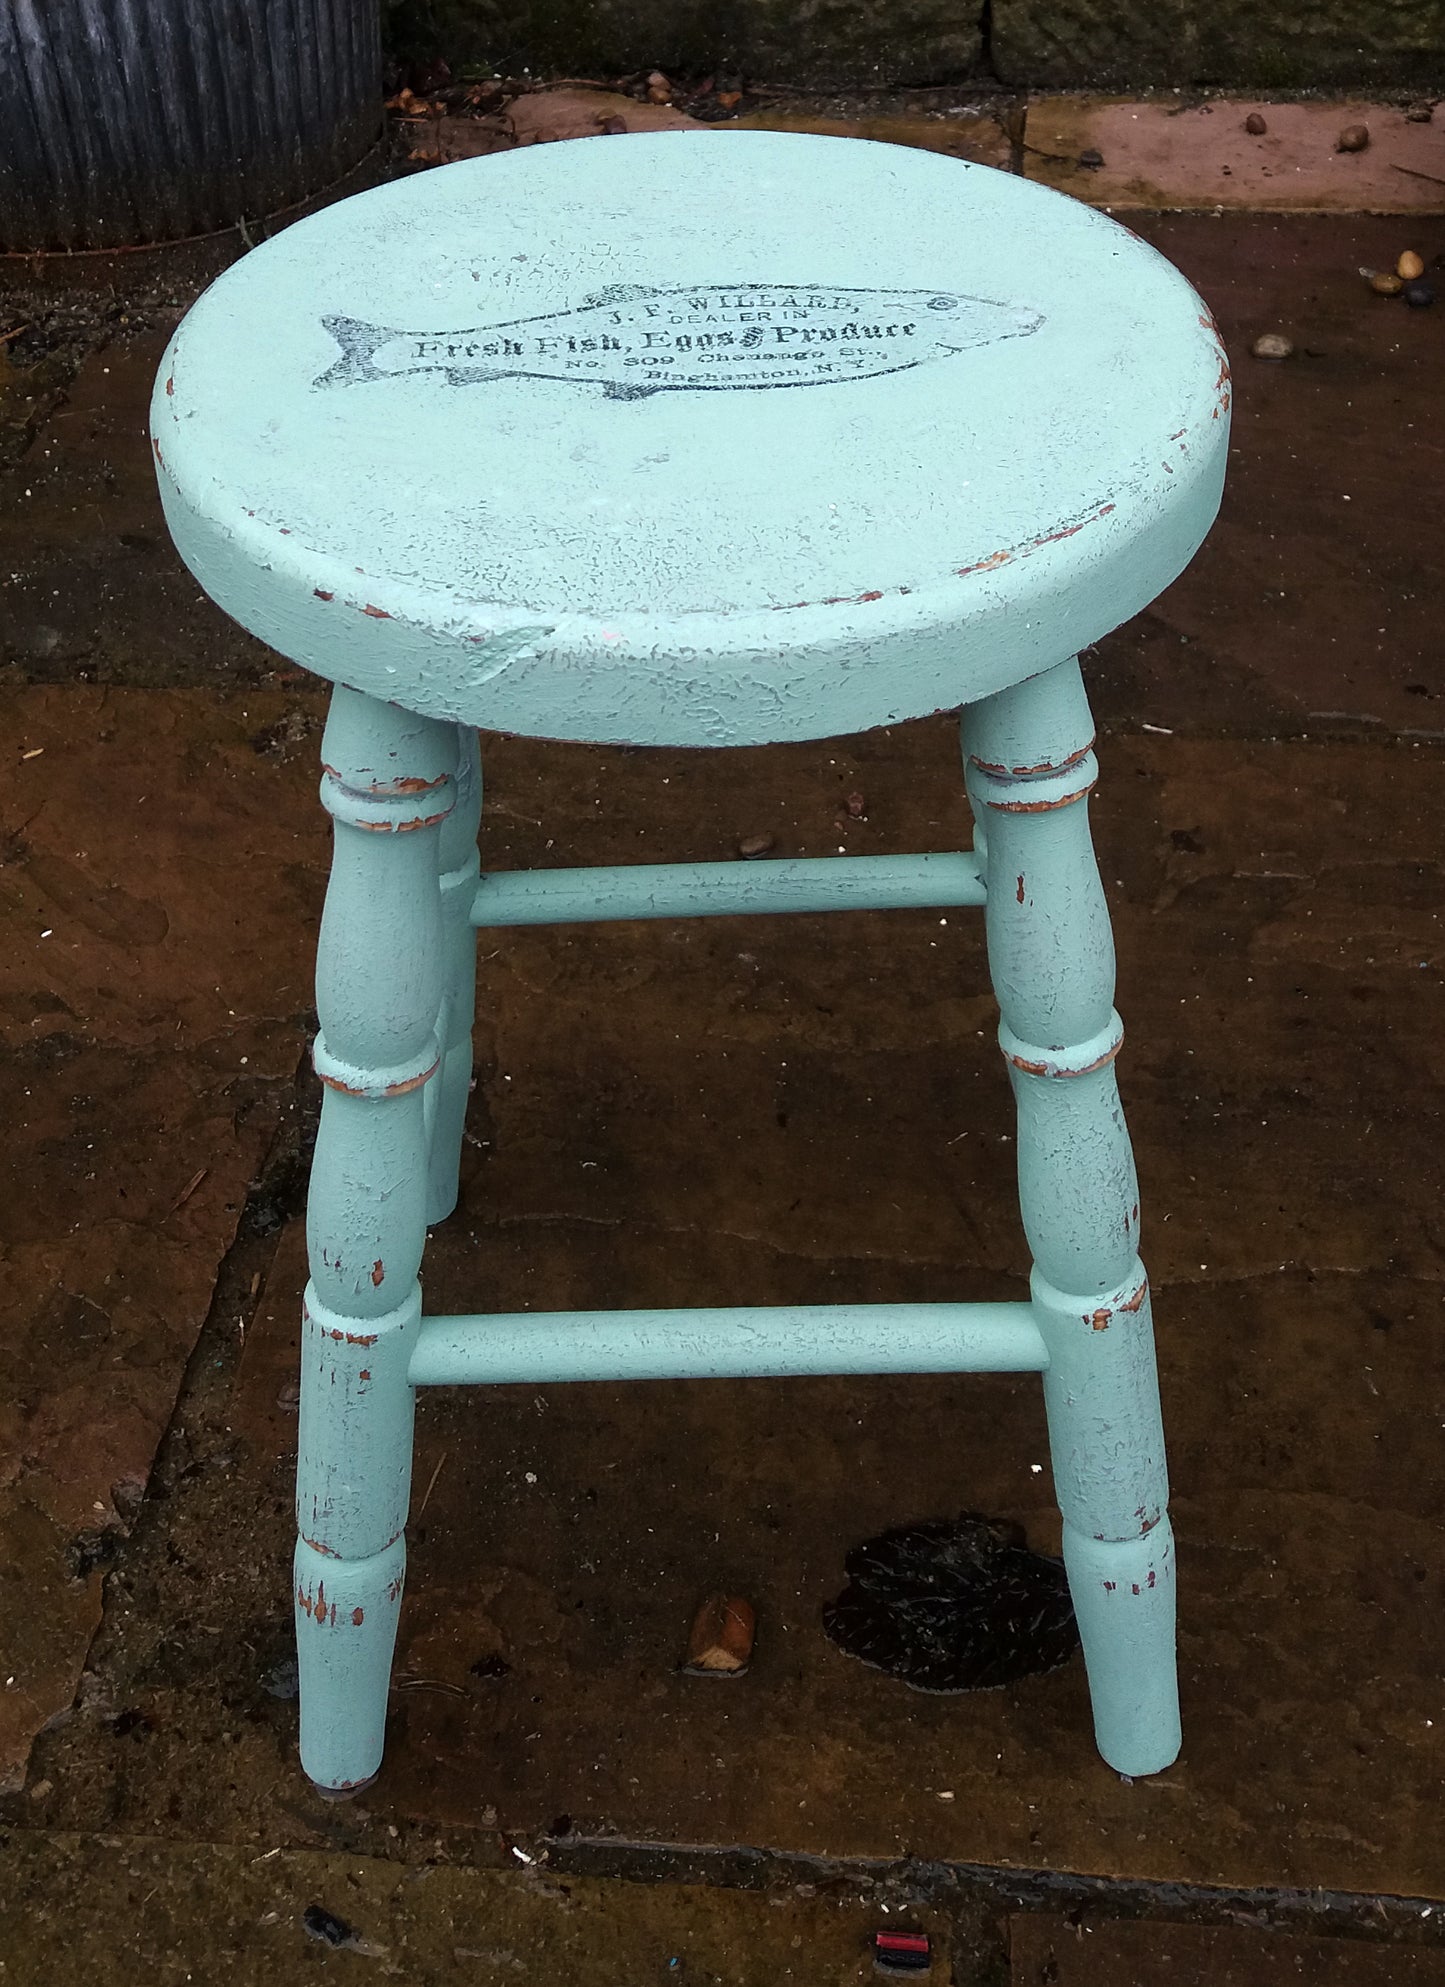 Vintage wooden stool painted in layers of textured paint with fish motif